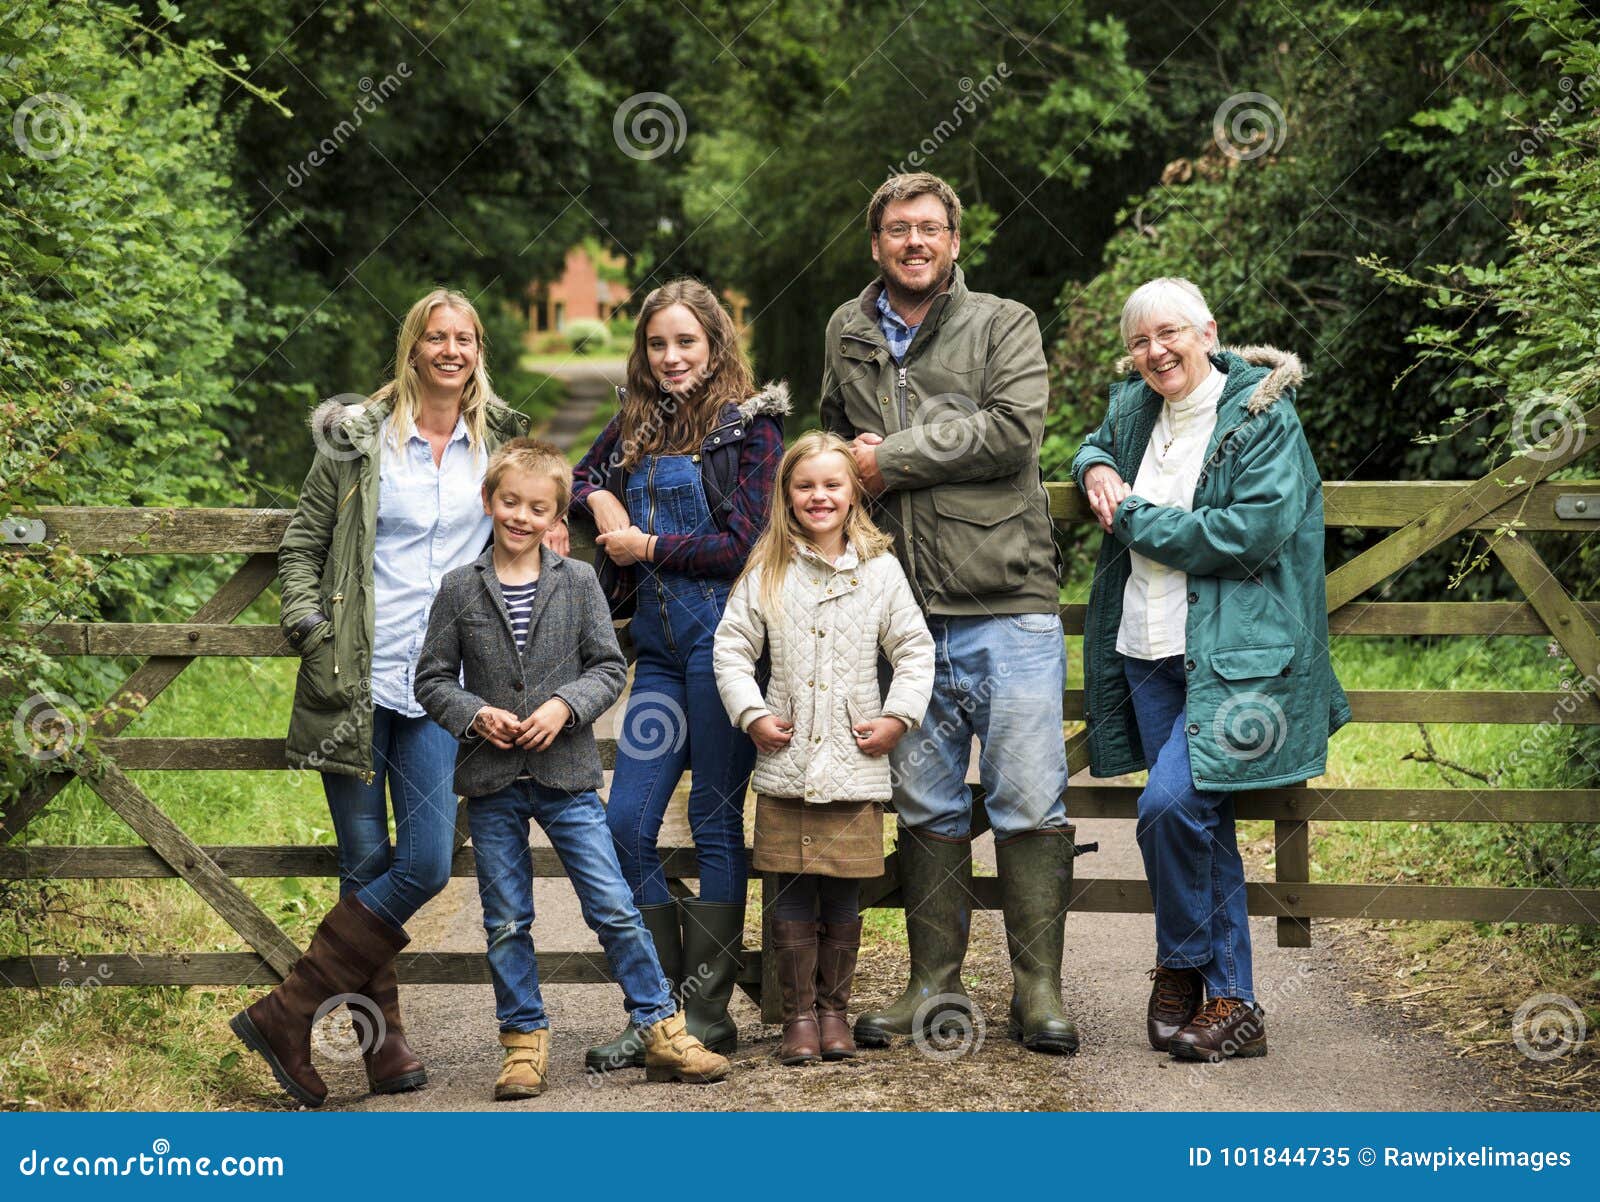 family generations parenting togetherness relaxation concept